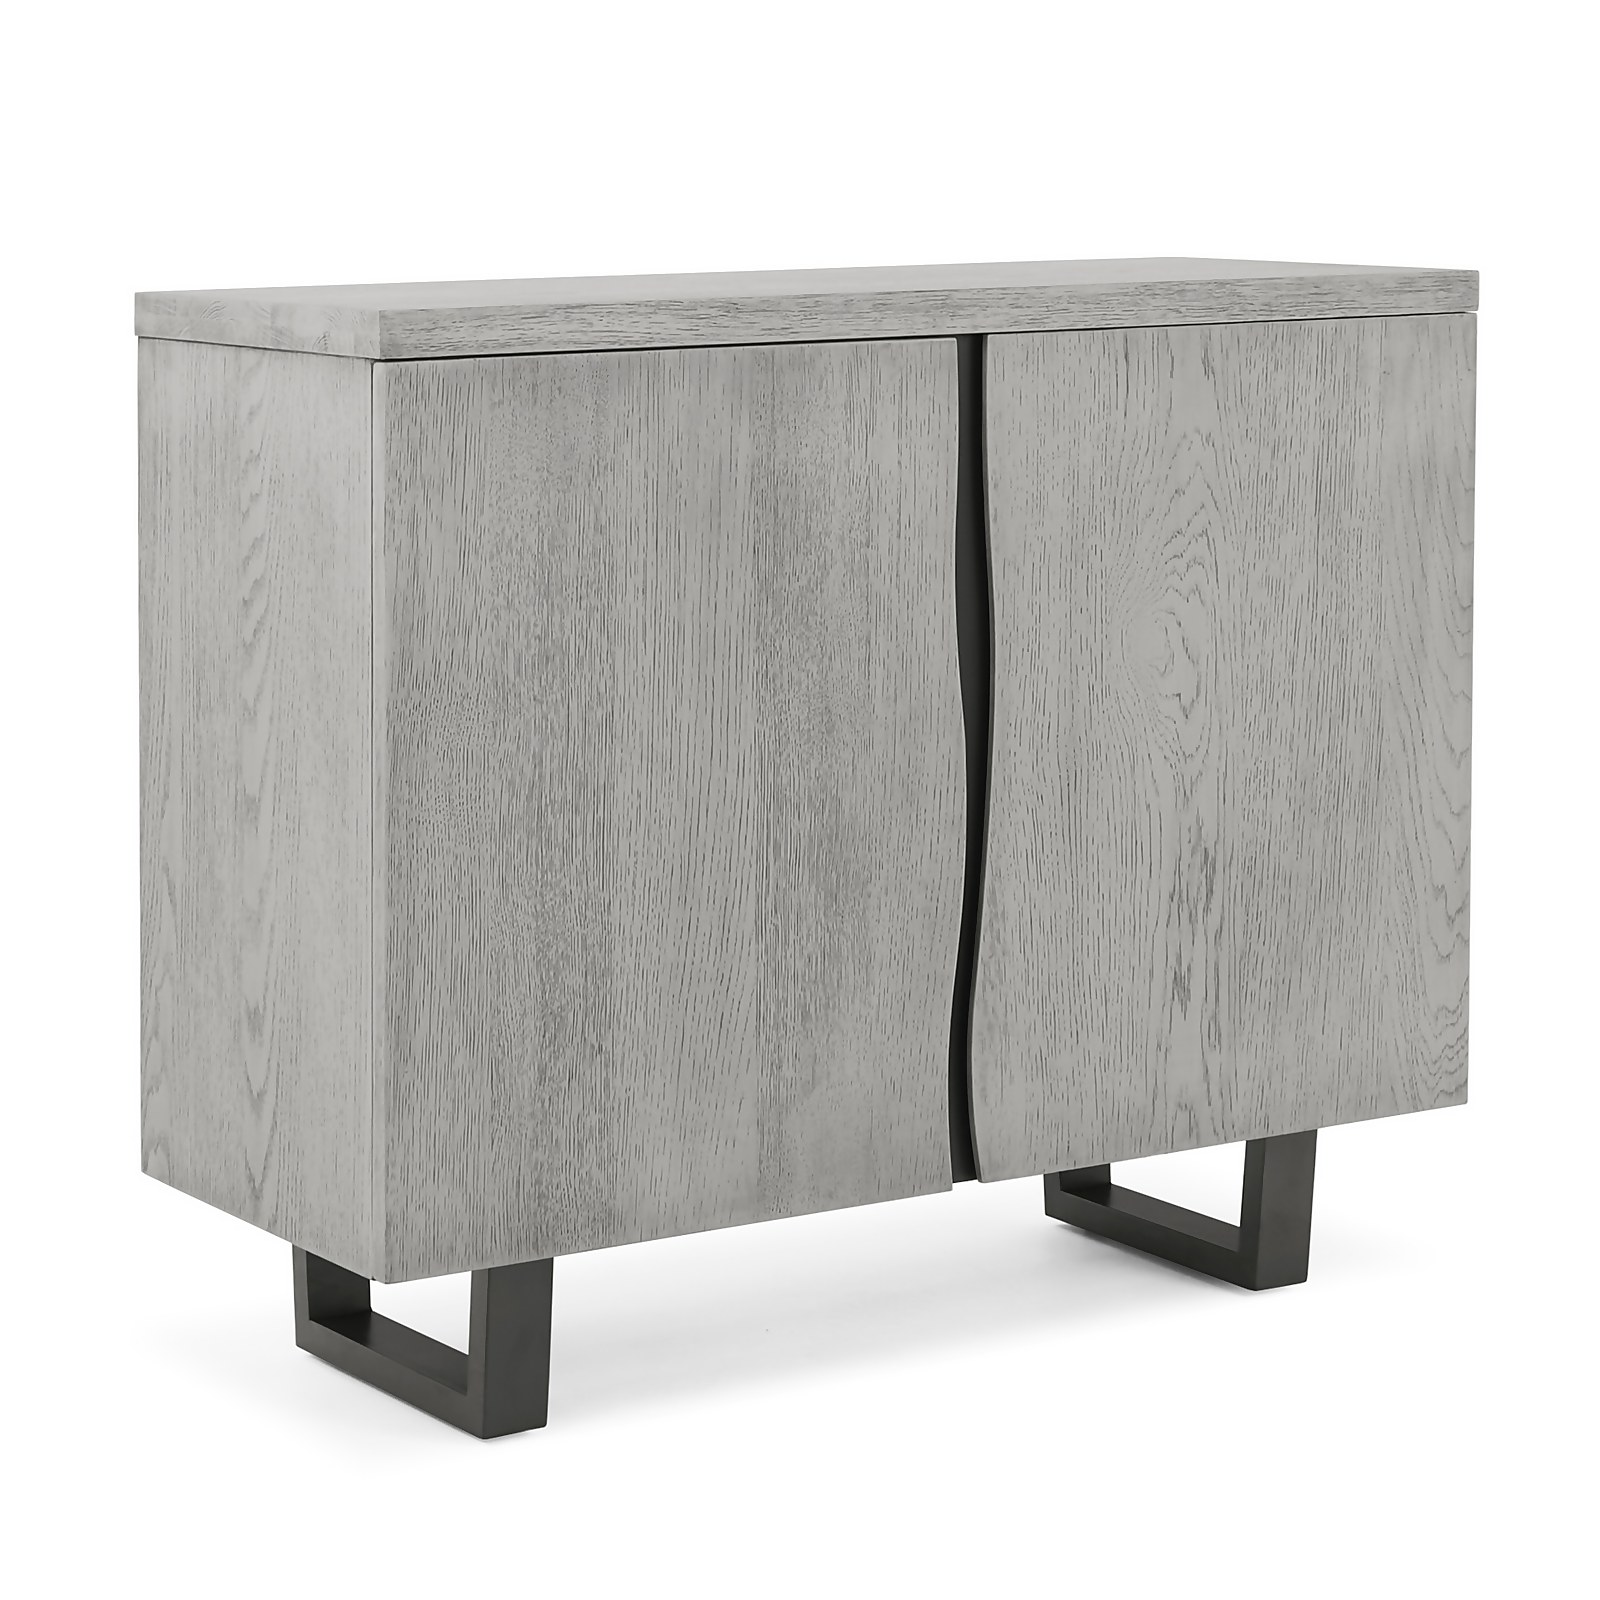 Photo of Dalston Grey Ash Small Sideboard